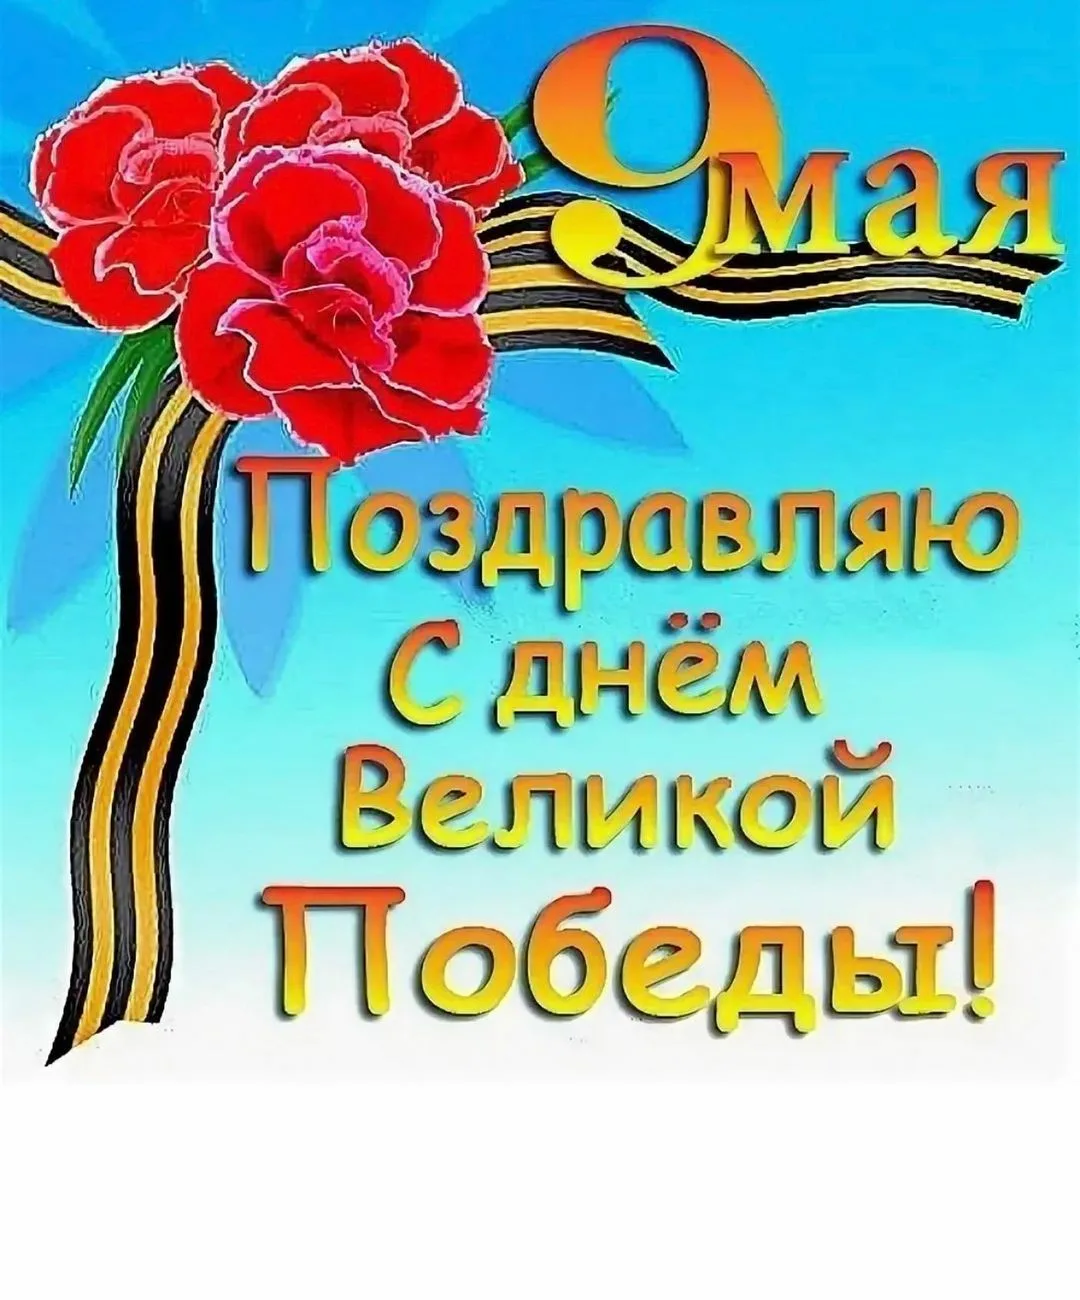 Фото Congratulations to grandmother on May 9 (Victory Day) #10